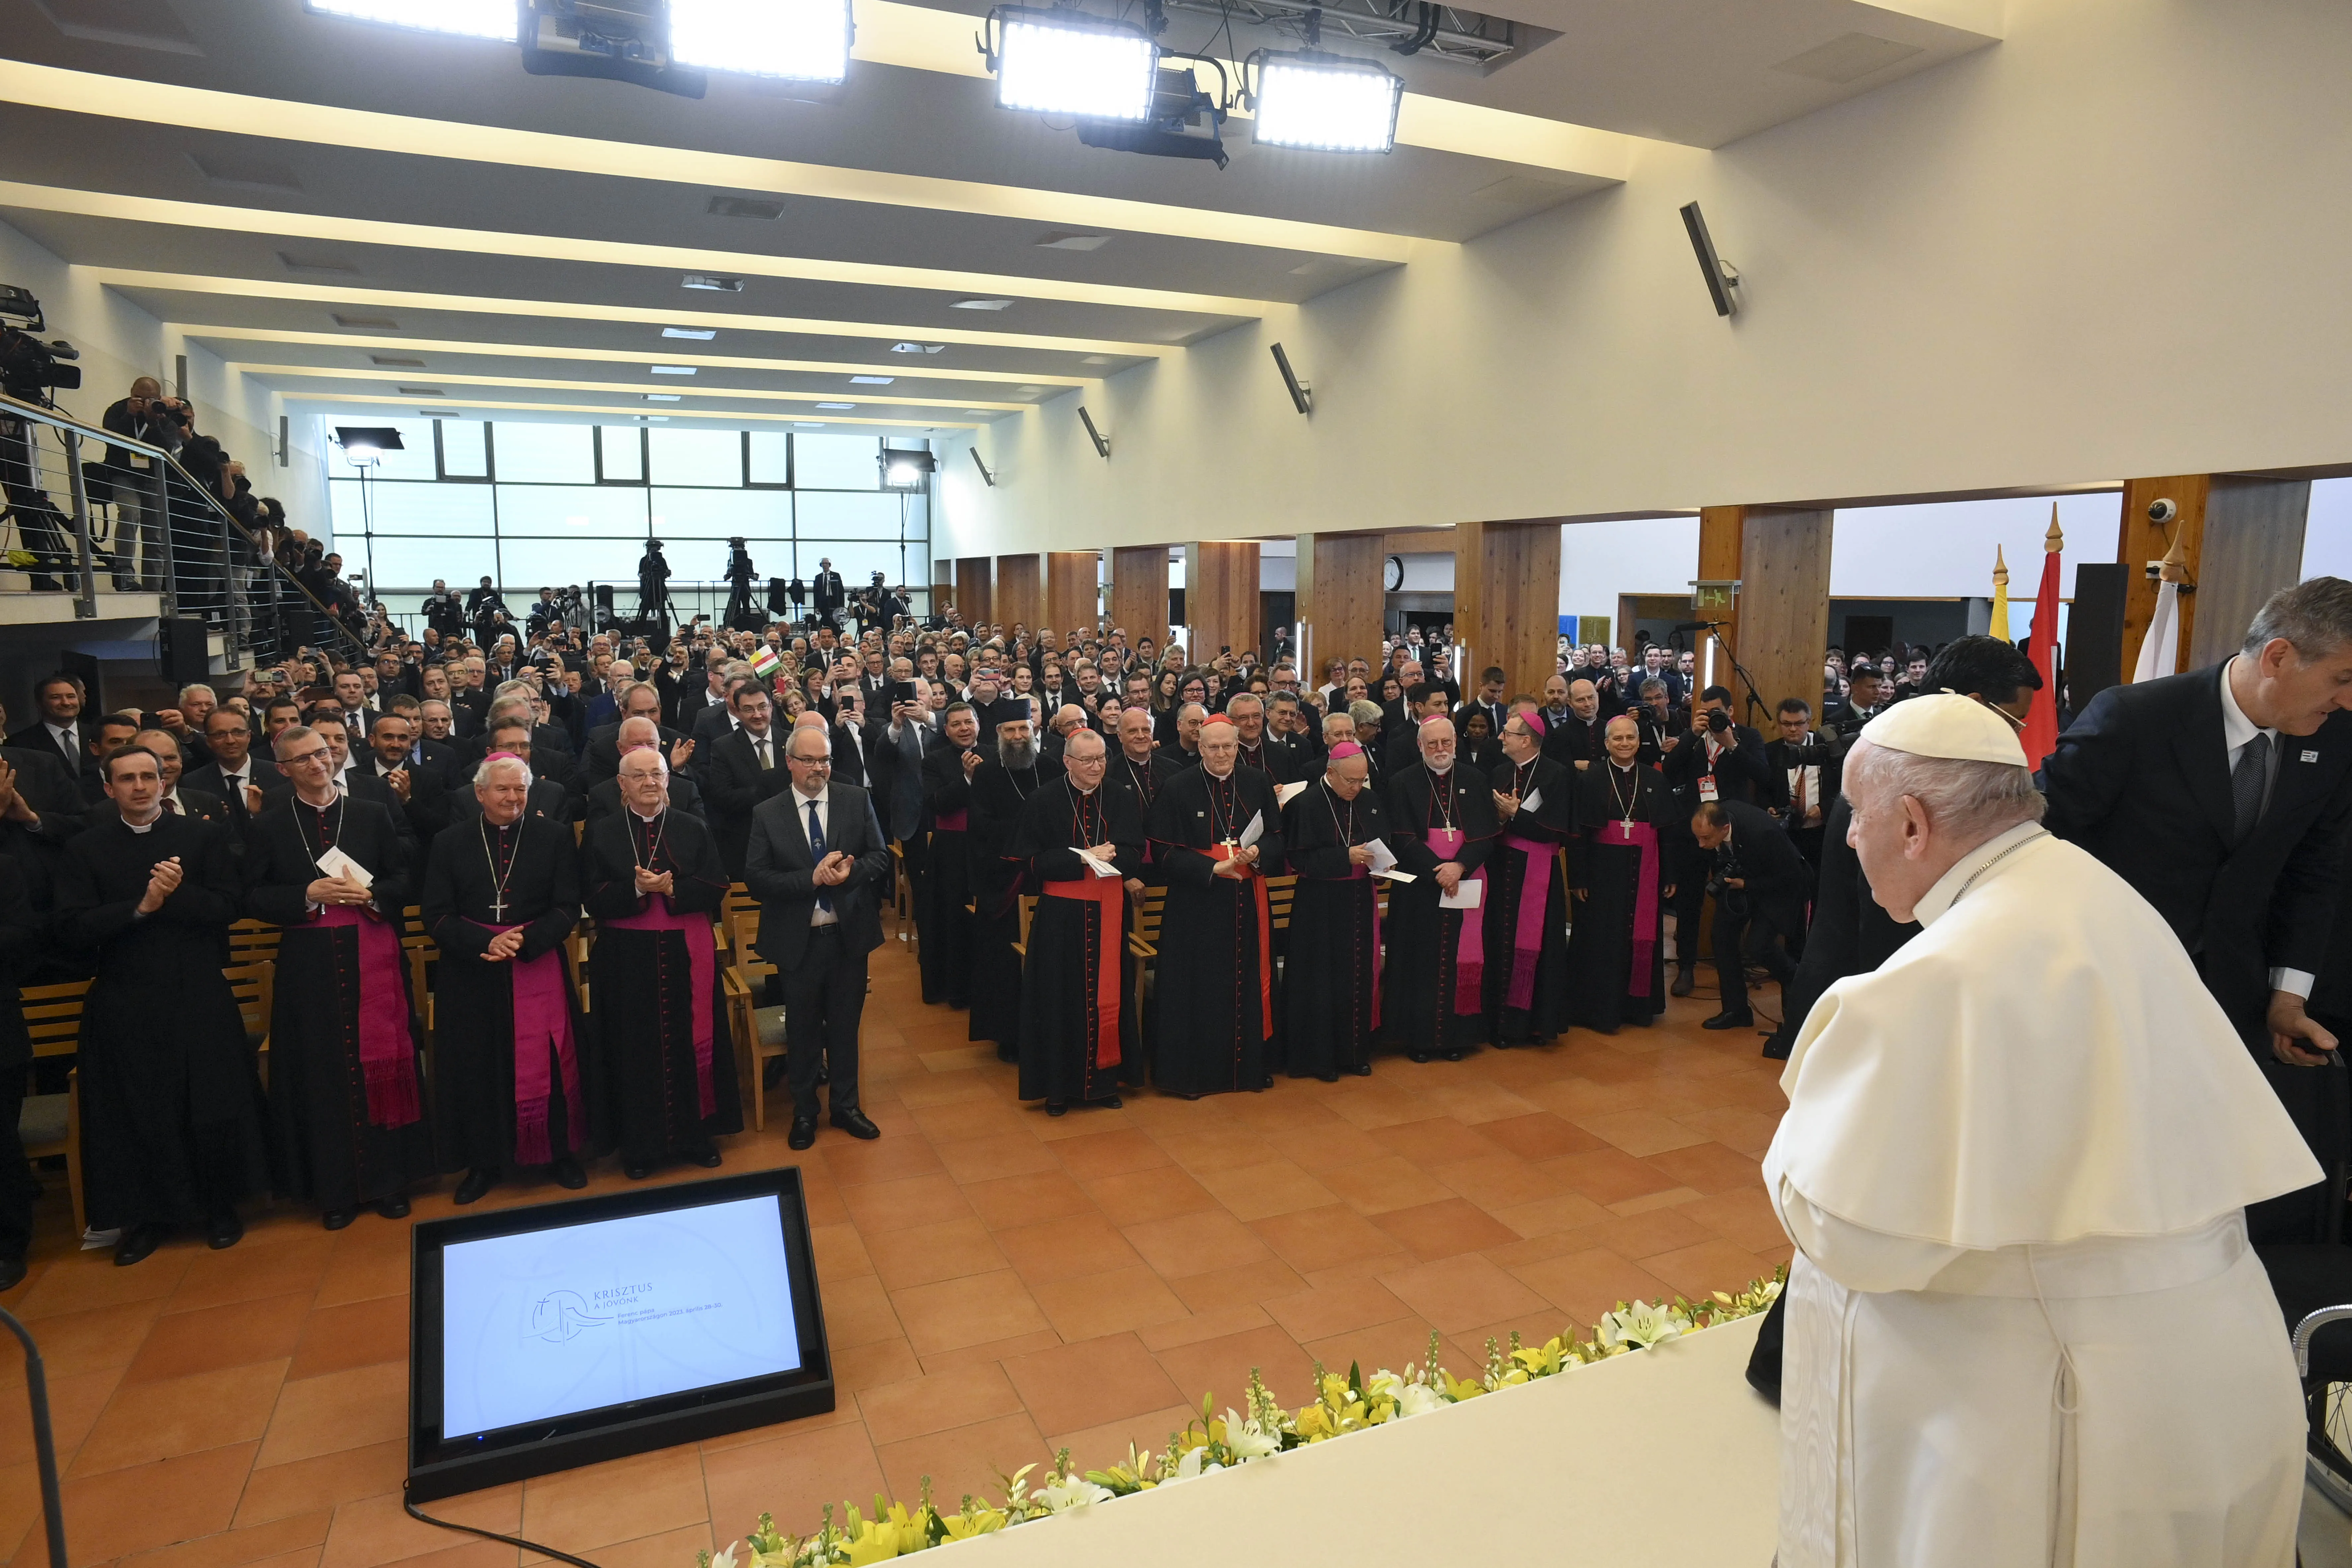 On April 30 the pope addressed around 250 people, including 30 students, from the Faculty of Information Technology and Bionics at the Pázmány Péter Catholic University in Budapest. Vatican News